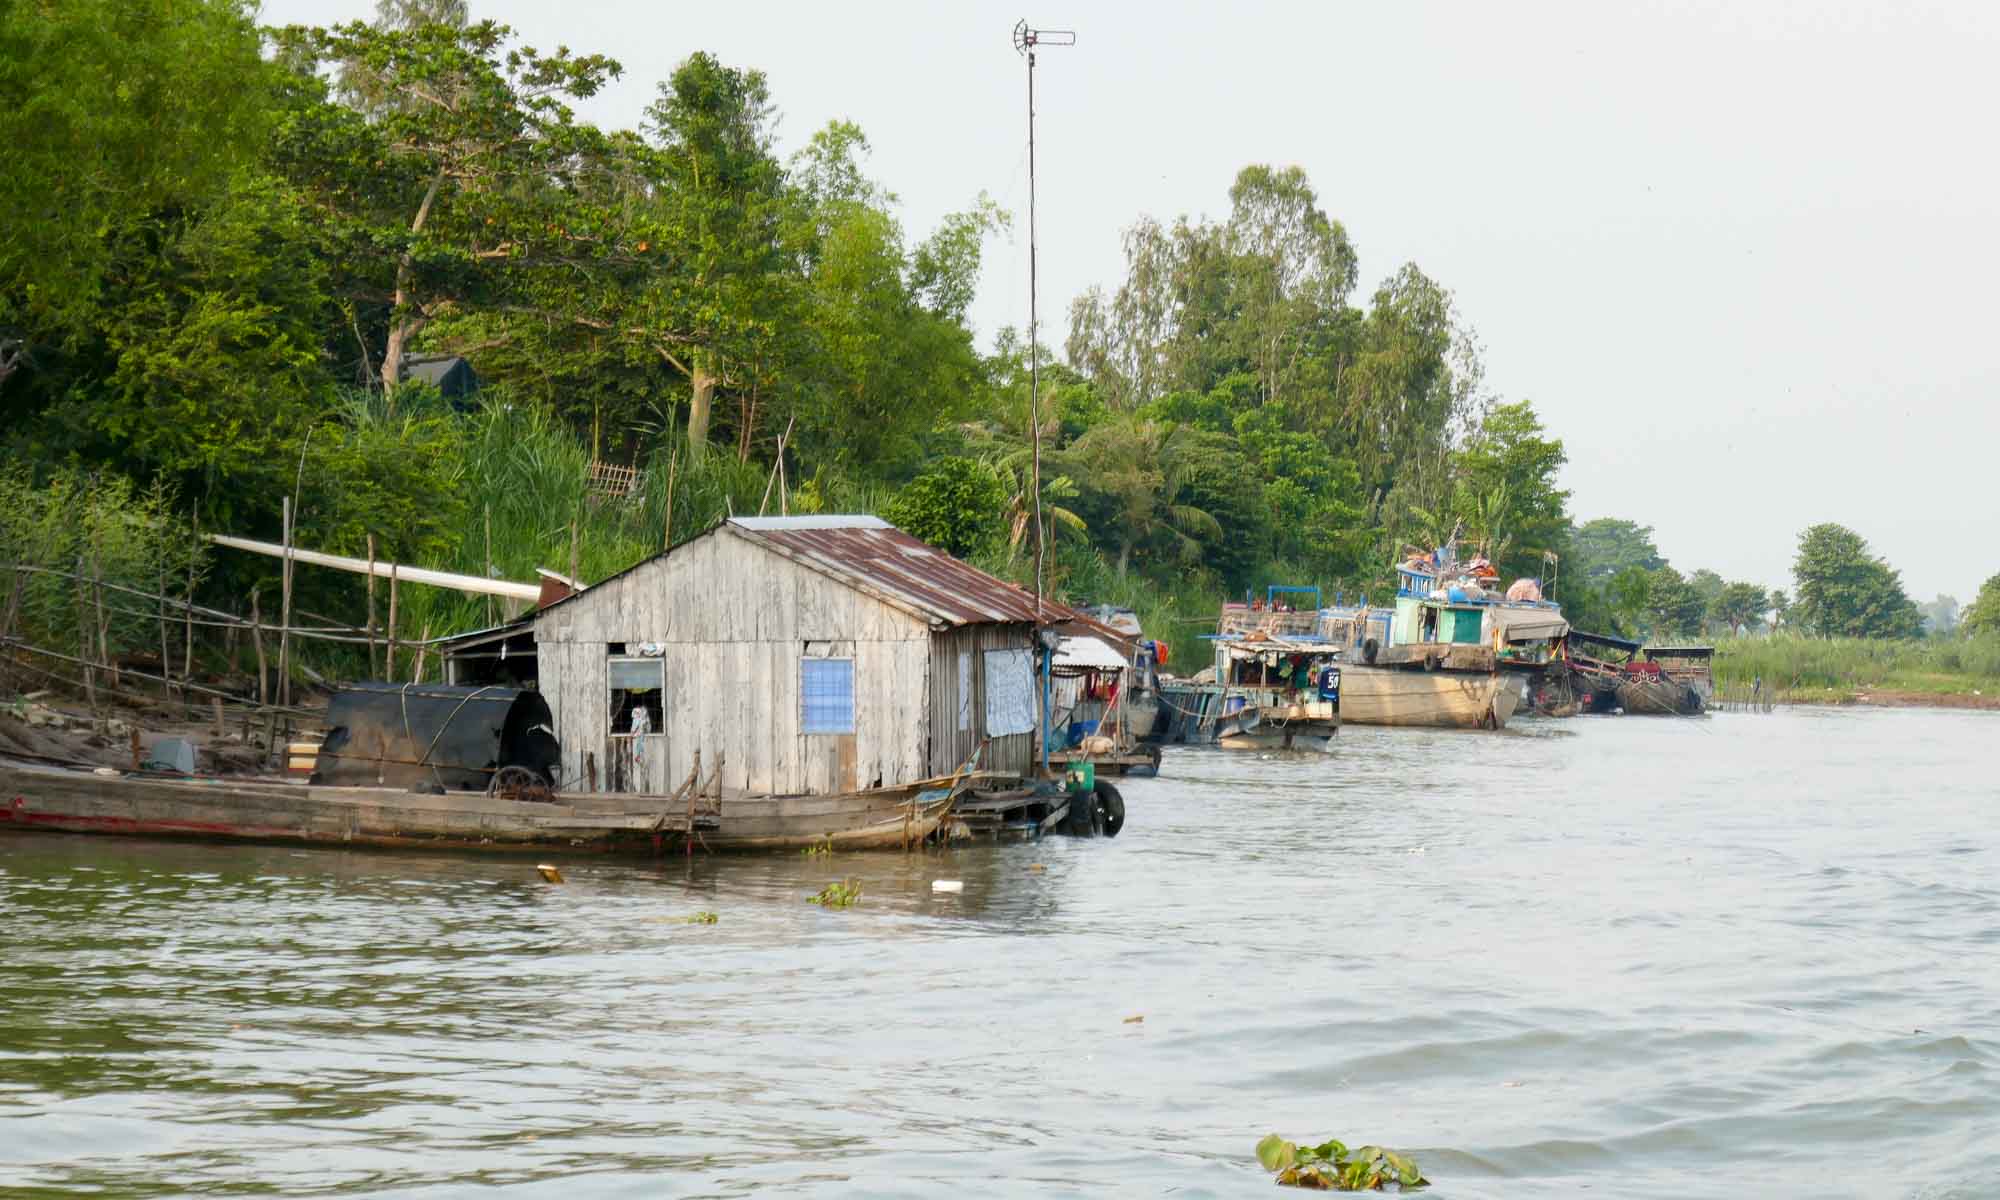 Local life on the Vietnamese section of the Mekong River 